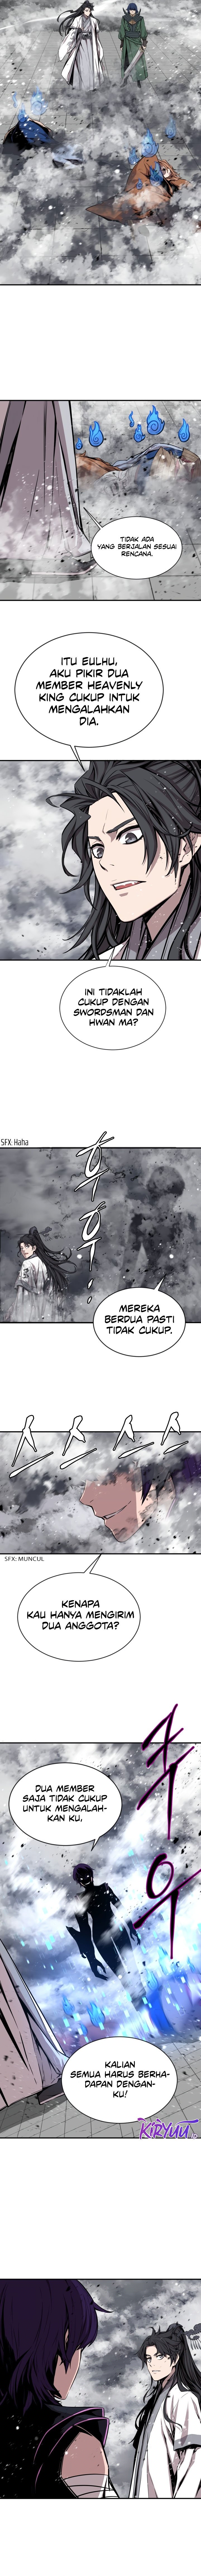 Legend Of Mir Gold Armored Sword Dragon Chapter 47